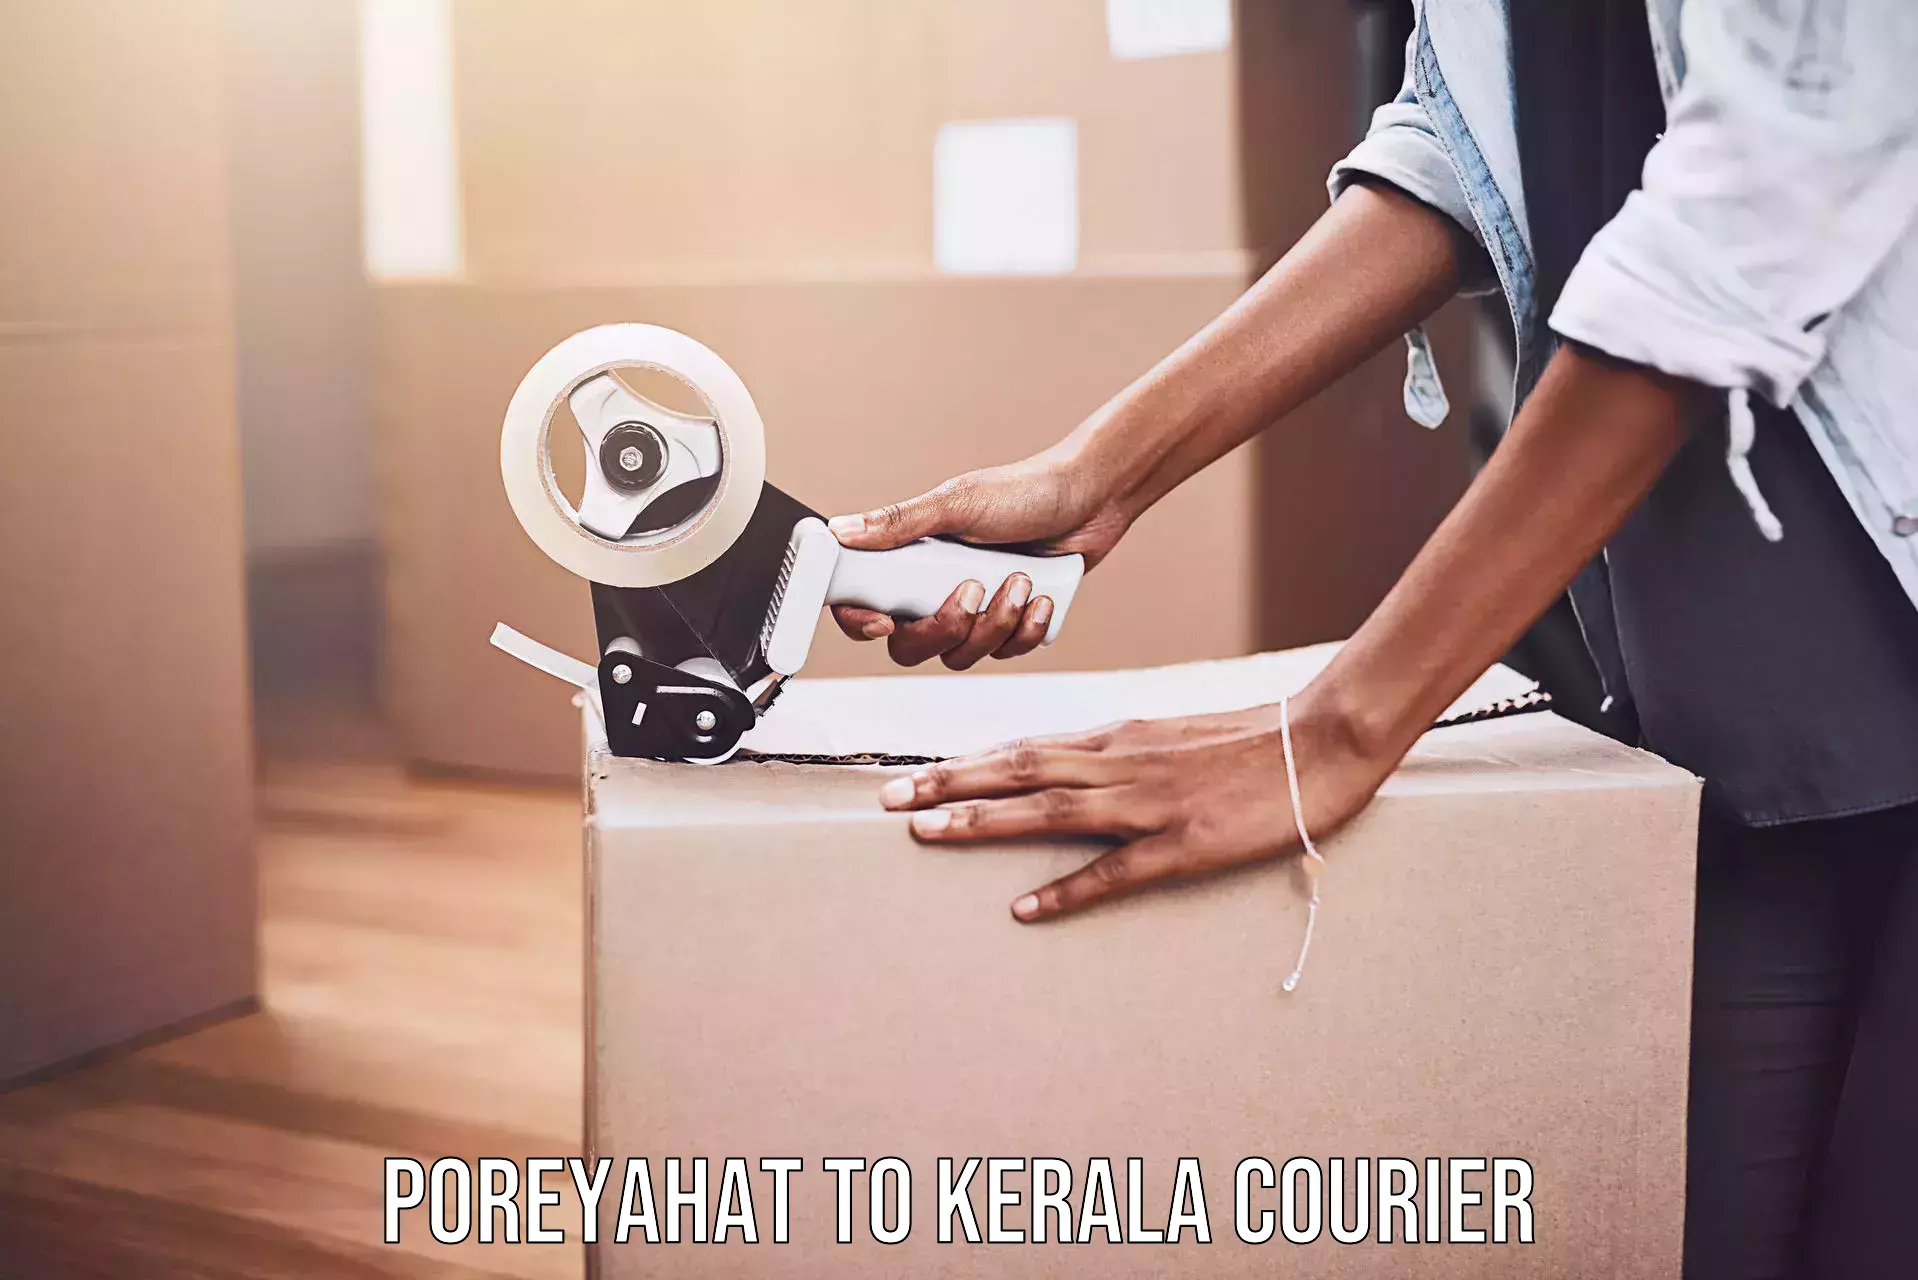 Rapid freight solutions Poreyahat to Kerala